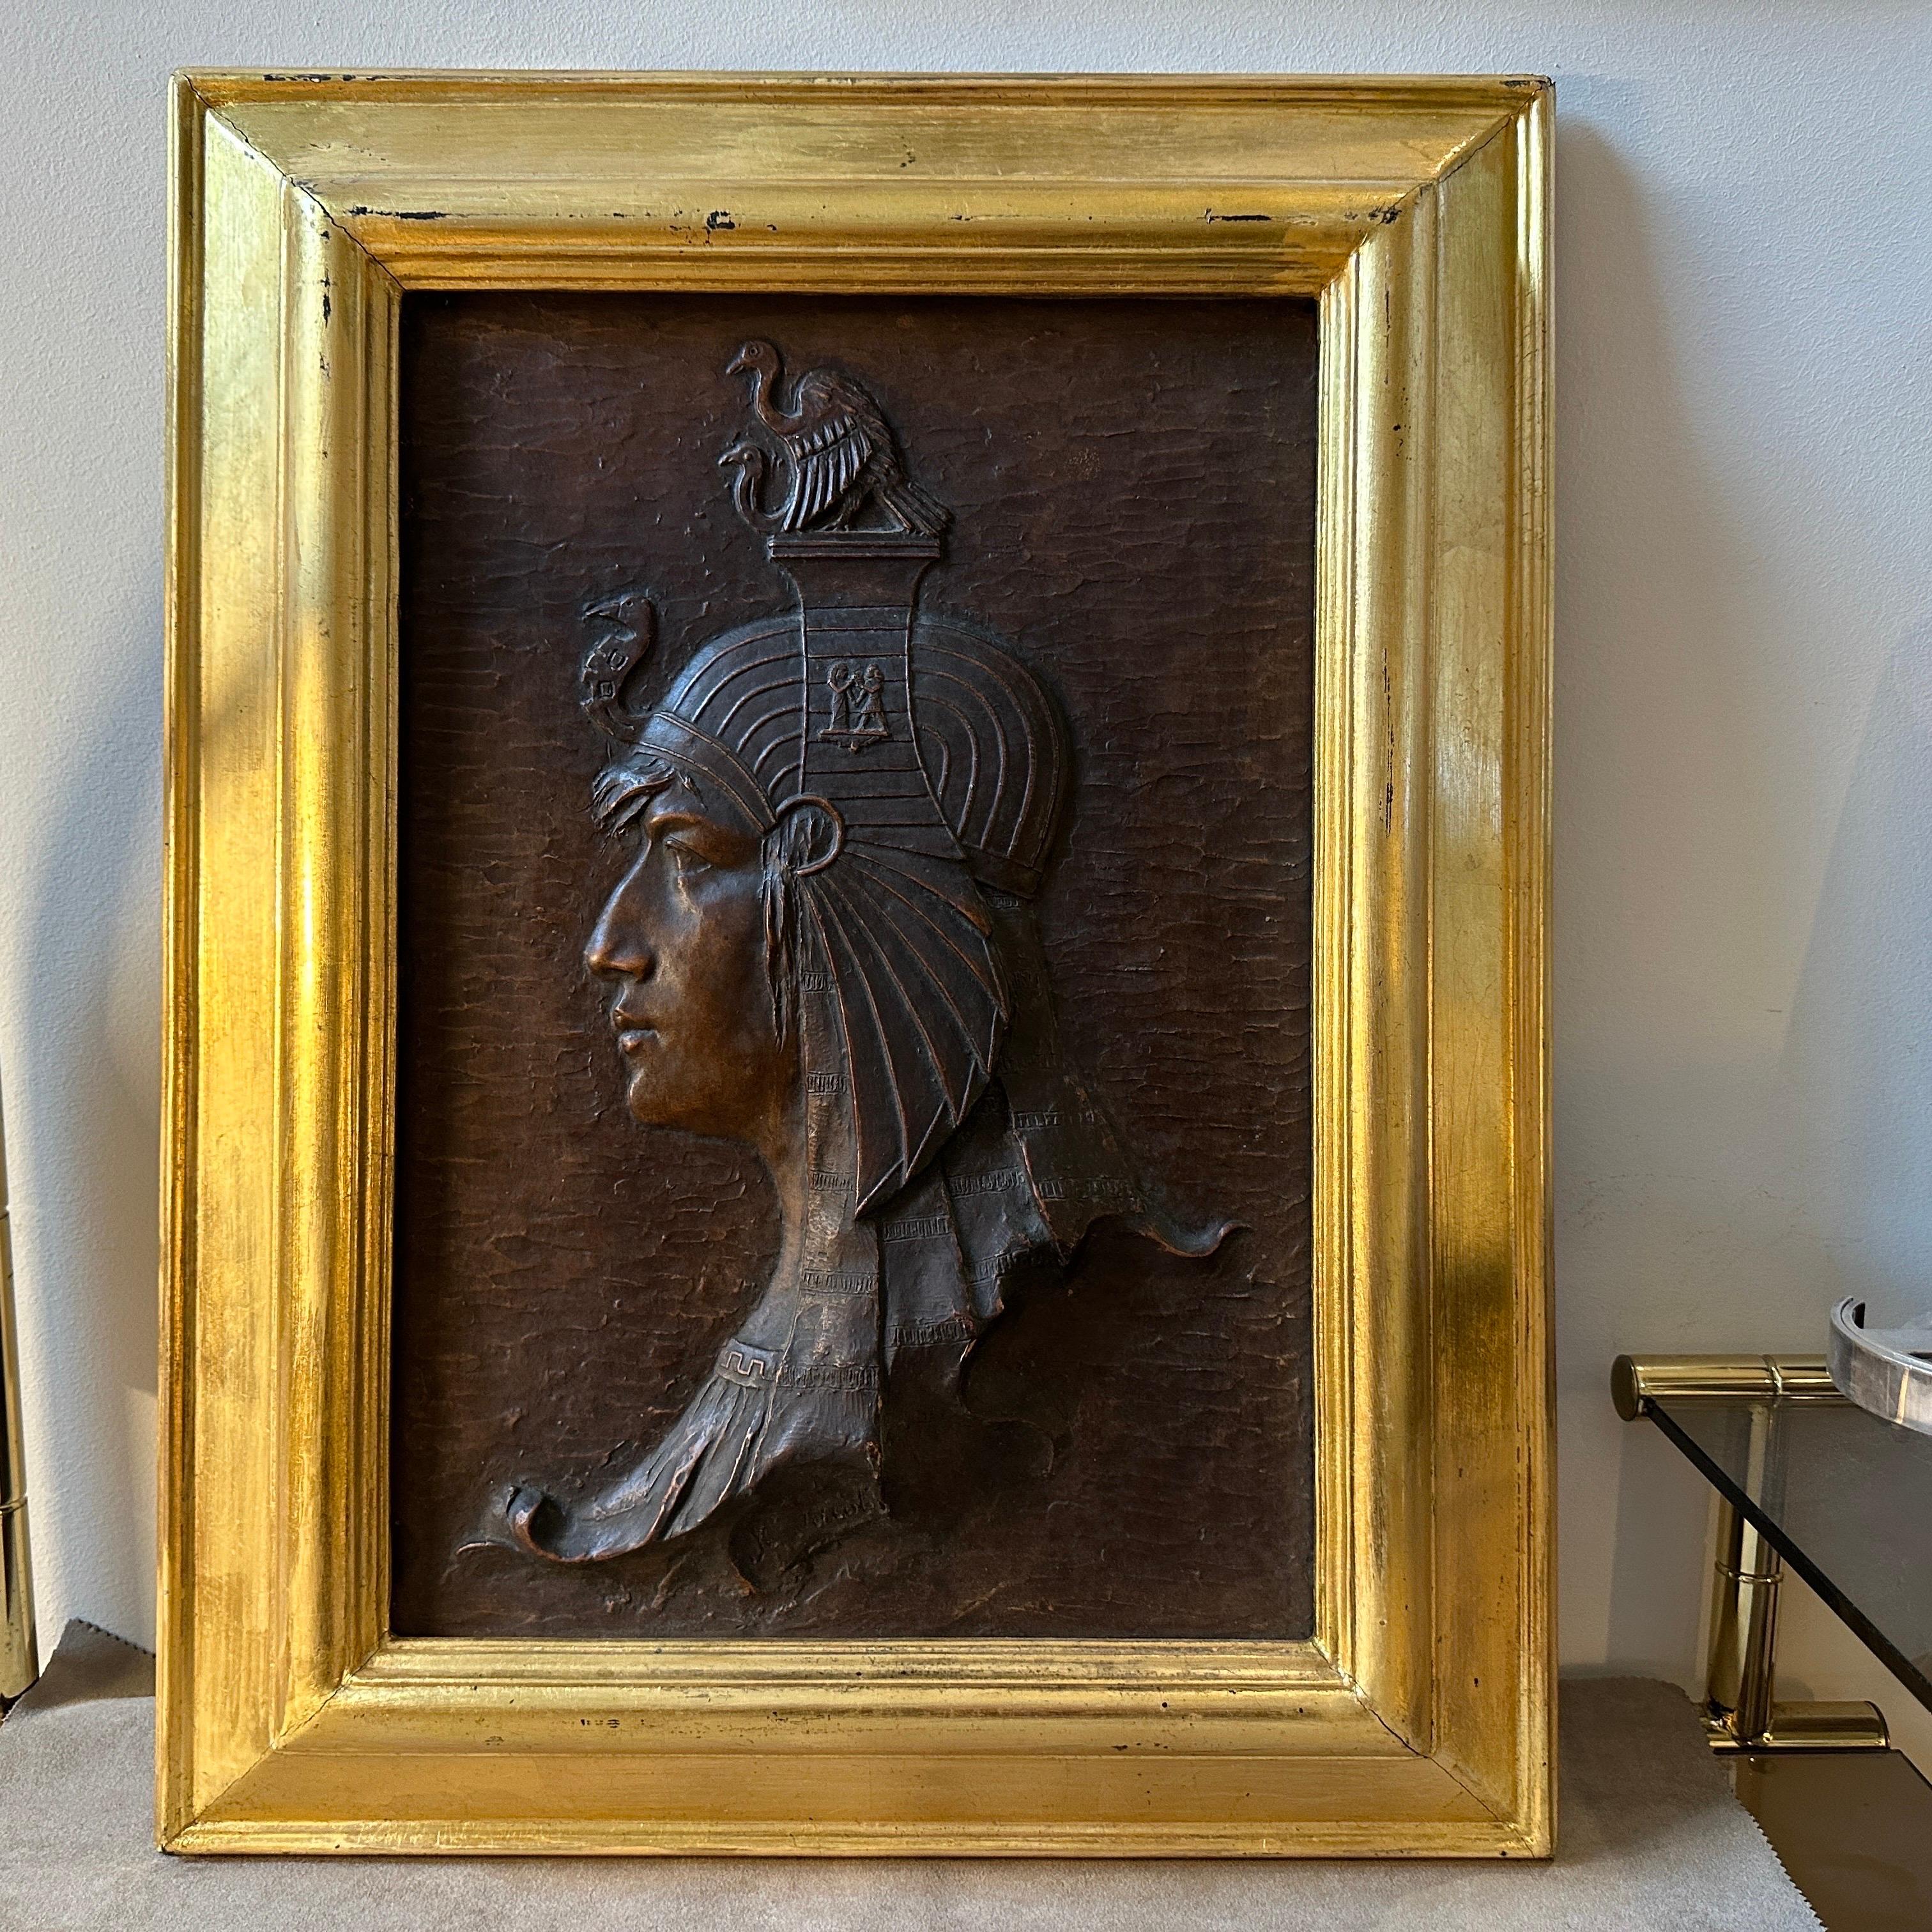 Hand-Crafted 1930s Art Deco Gilded Wood Framed Italian Plaster Bas-Relief For Sale